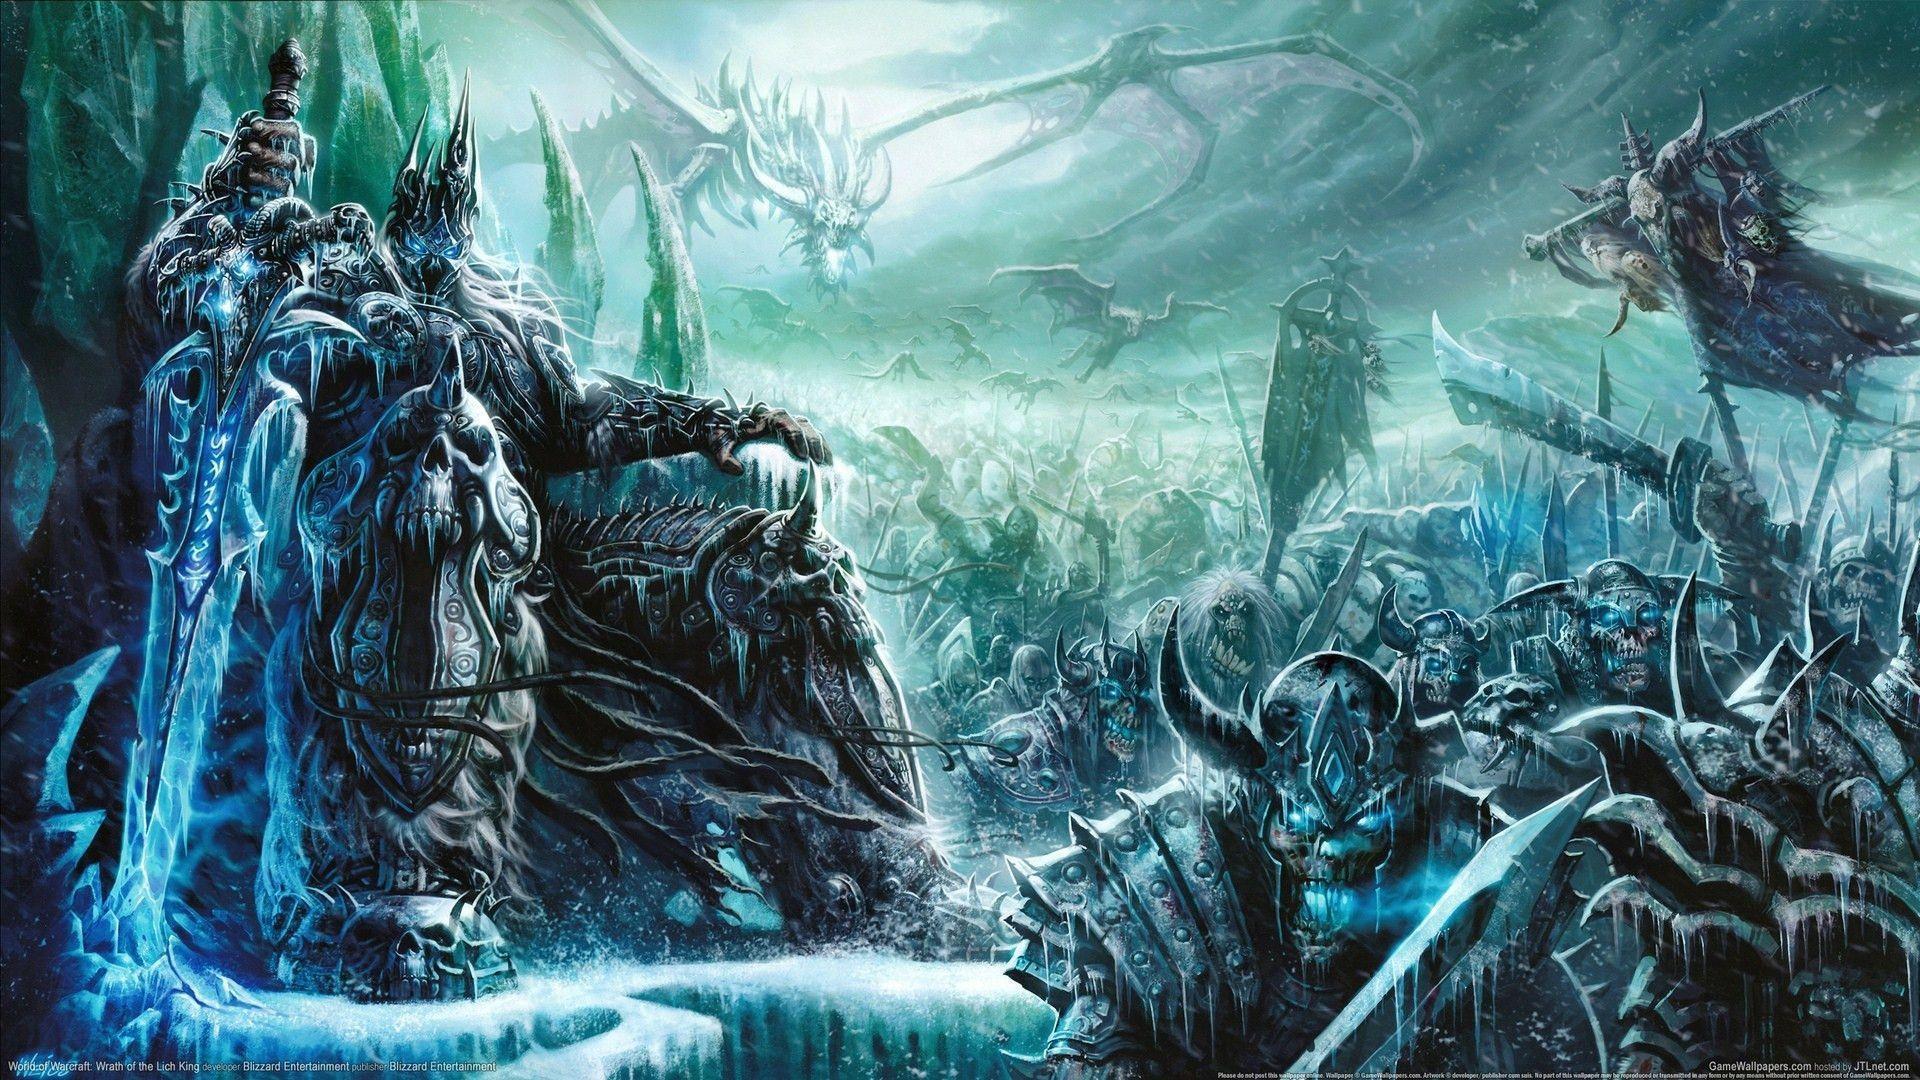 Lich king» 1080P, 2k, 4k HD wallpapers, backgrounds free download | Rare  Gallery